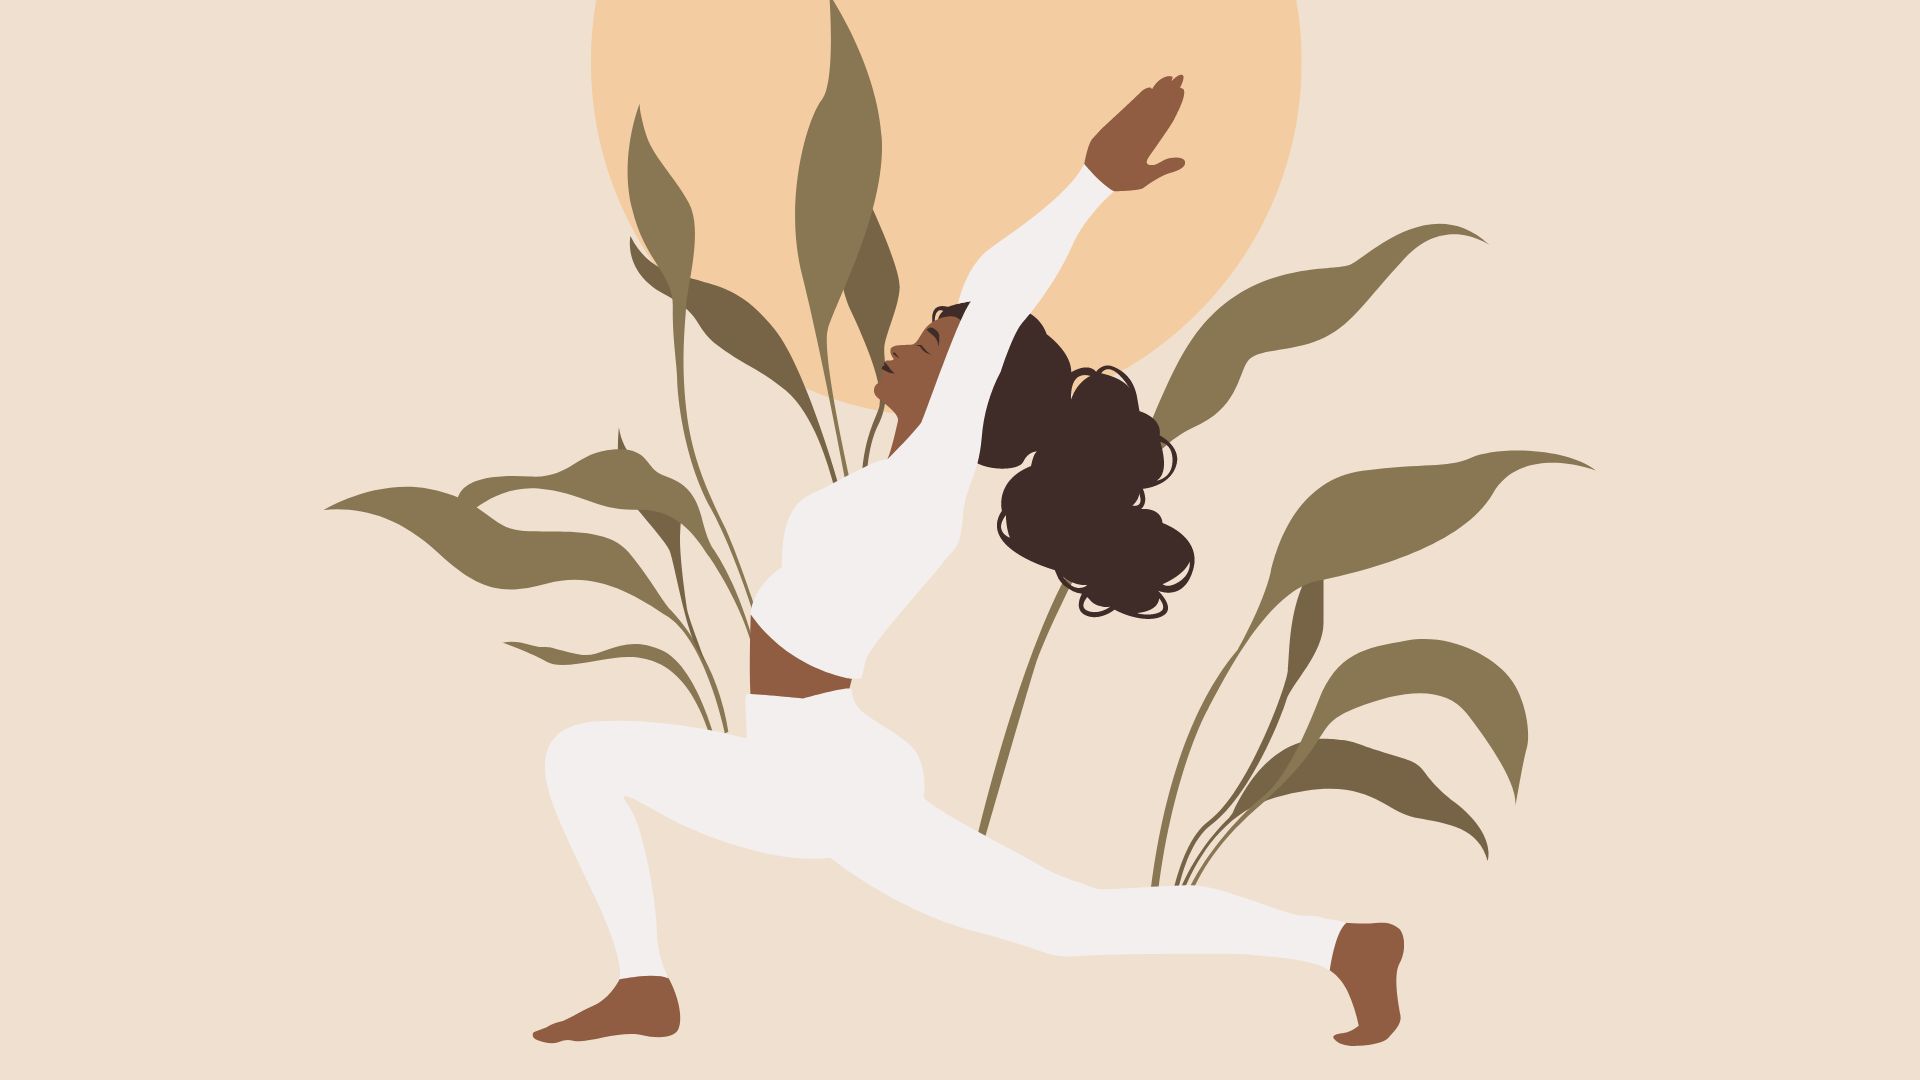 An illustration of a woman stretching in a yoga pose with plants behind her.